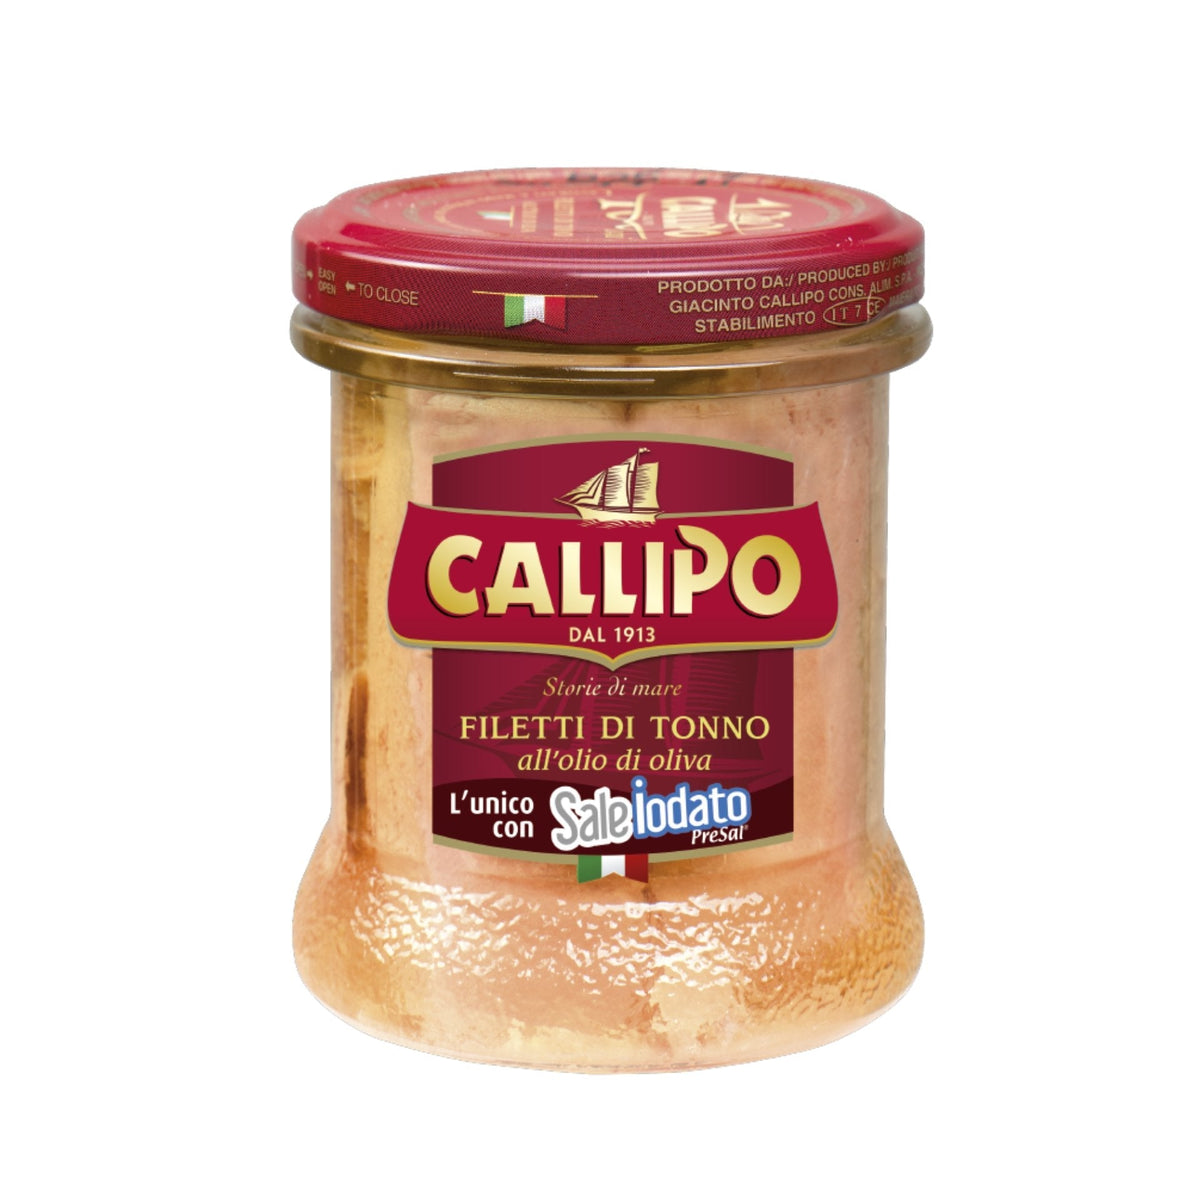 Callipo Hand Packed Yellowfin Tuna Fillets in Olive Oil (Glass Jar) 170g  | Imported and distributed in the UK by Just Gourmet Foods